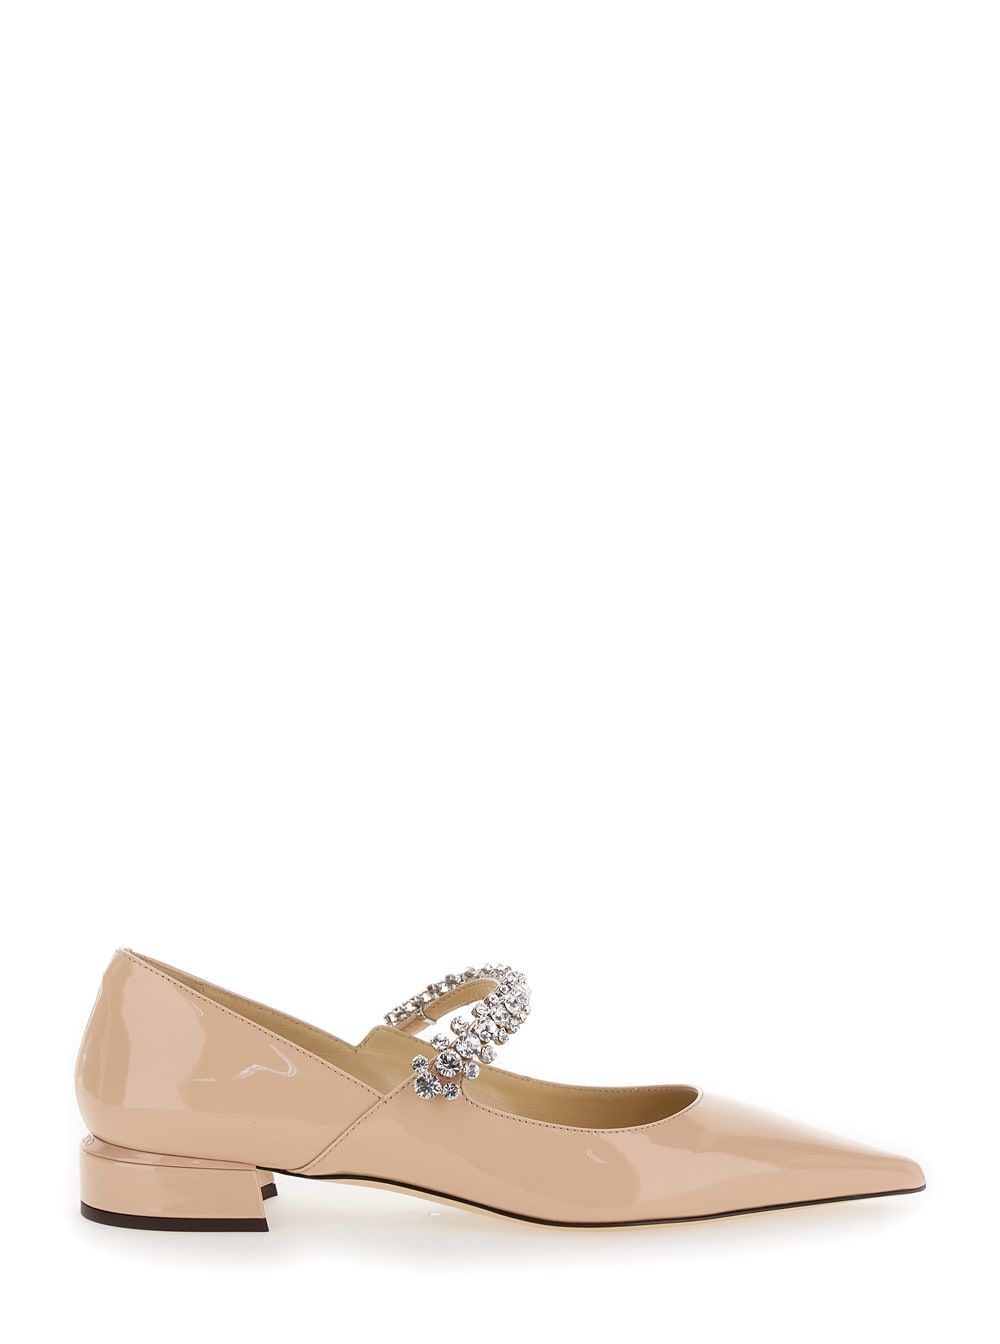 Beige Sabot With Rhinestone And Low Heel In Patent Leather Woman